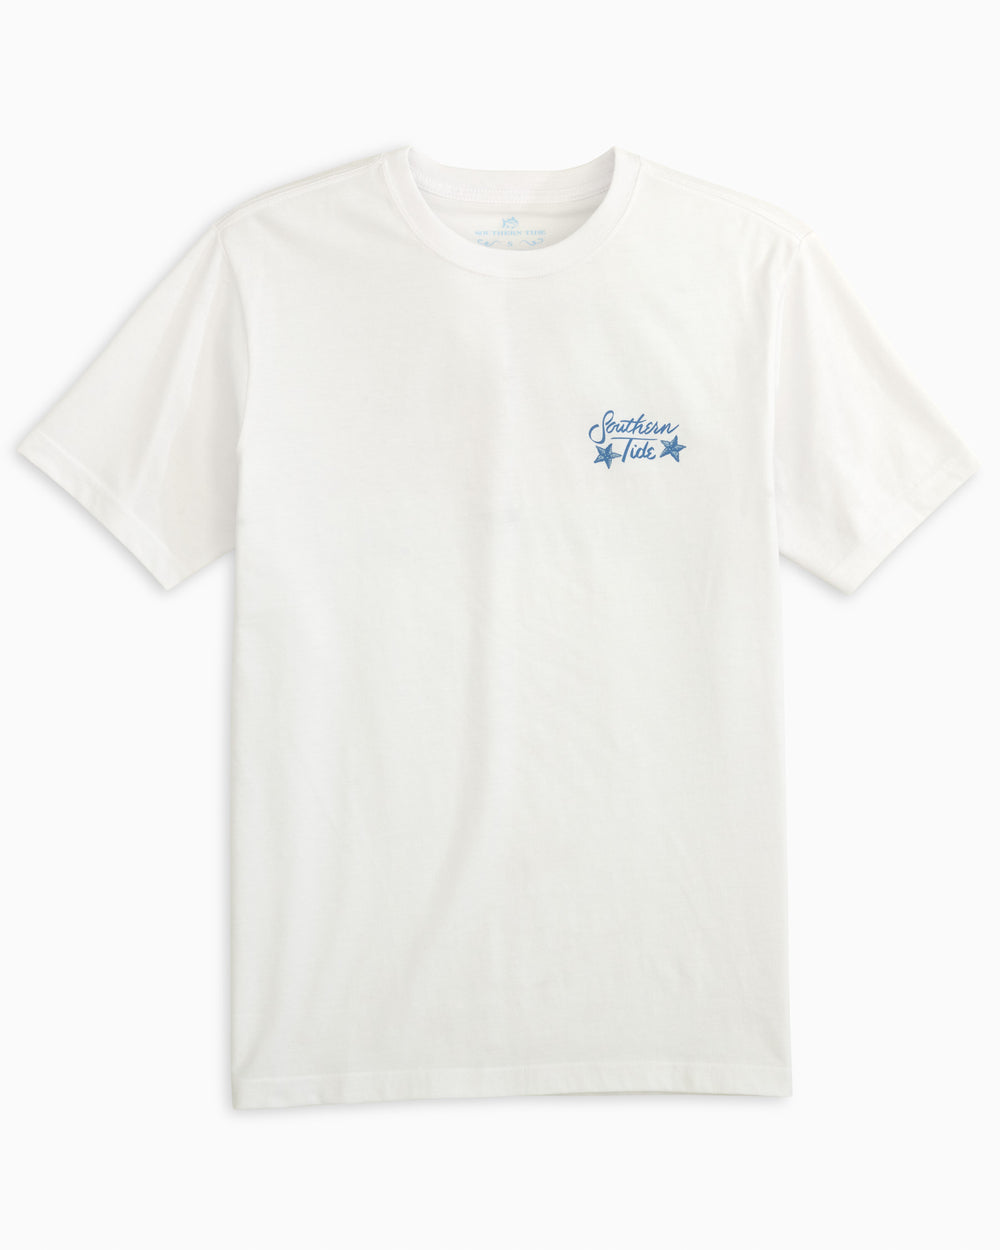 The front view of the Women's Sea to Shining Sea Shell T-Shirt by Southern Tide - Classic White